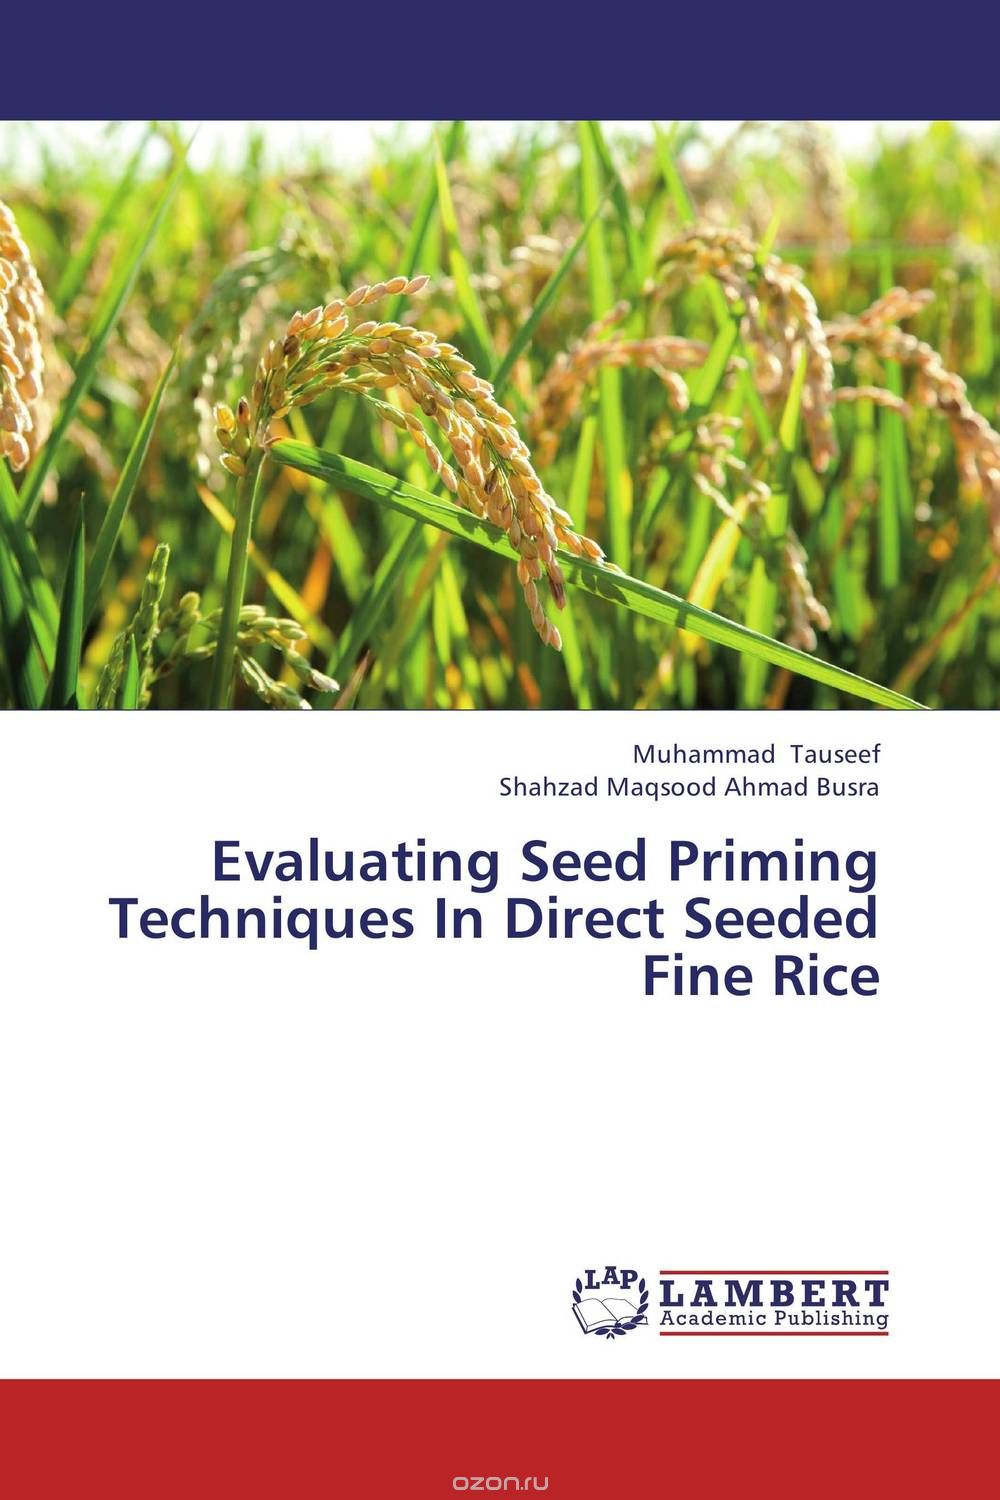 Evaluating Seed Priming Techniques In Direct Seeded Fine Rice